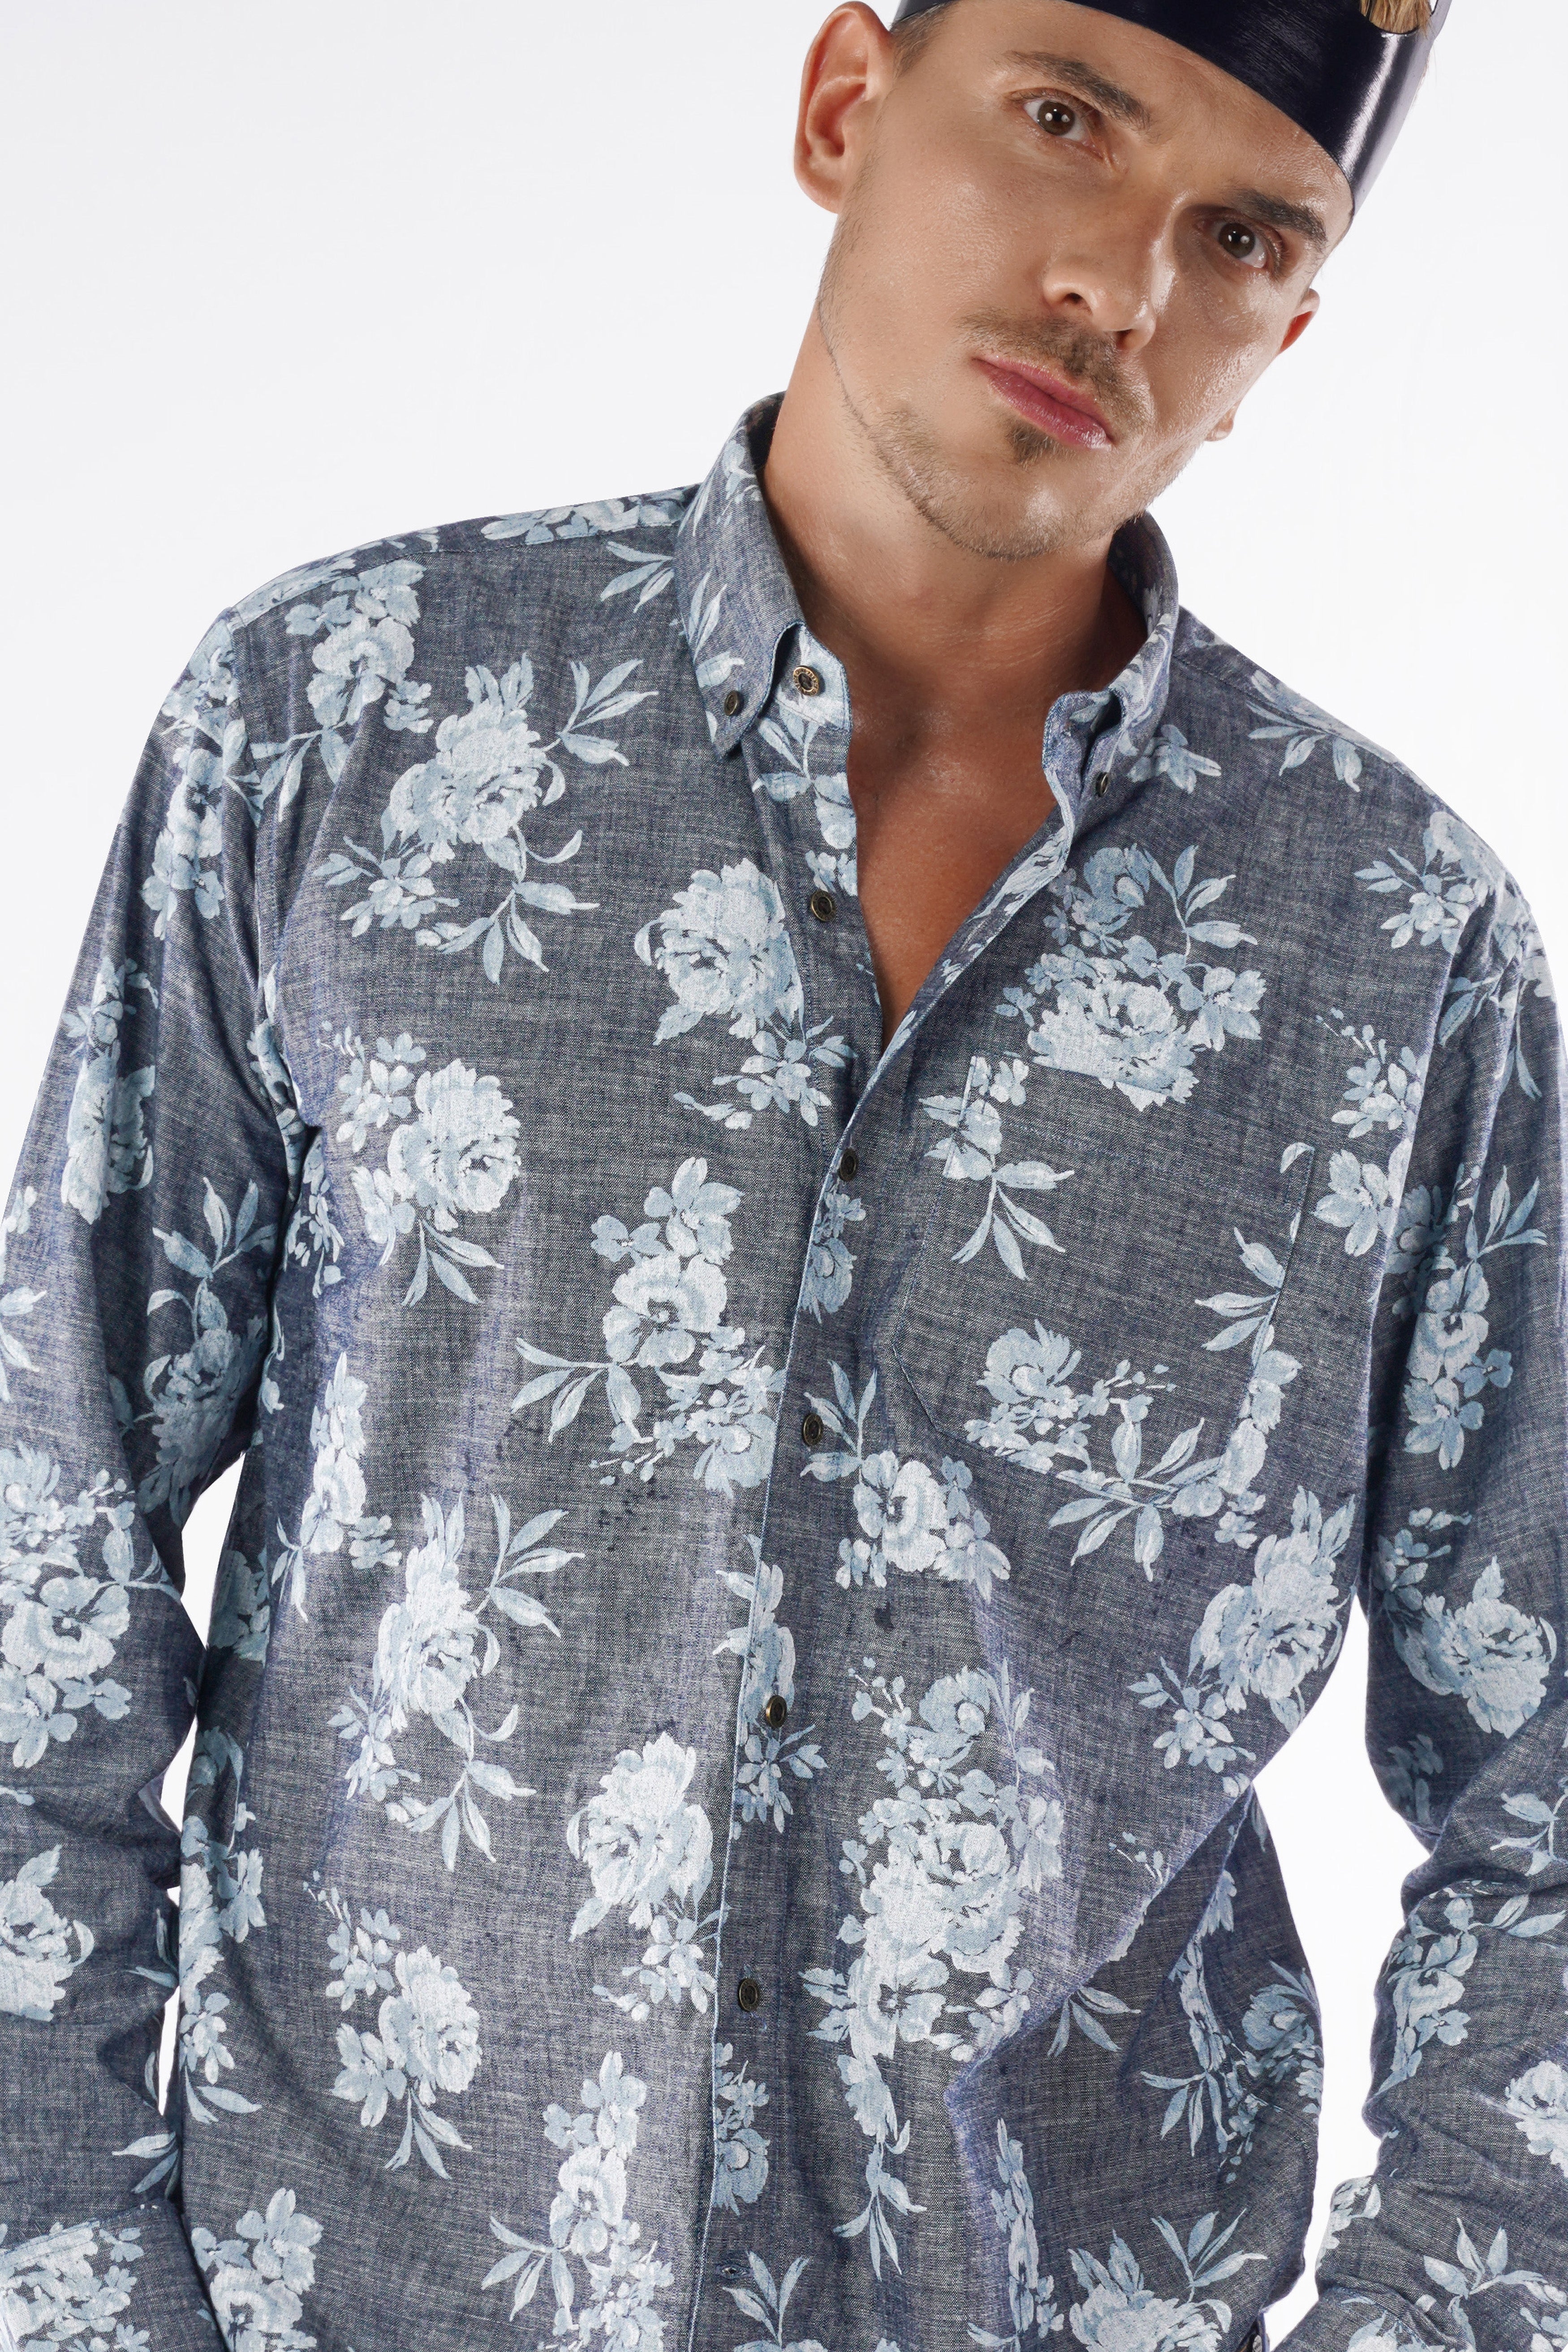 Nevada with Languid Gray Floral Textured Denim Shirt 10146-BD-MB-38, 10146-BD-MB-H-38, 10146-BD-MB-39, 10146-BD-MB-H-39, 10146-BD-MB-40, 10146-BD-MB-H-40, 10146-BD-MB-42, 10146-BD-MB-H-42, 10146-BD-MB-44, 10146-BD-MB-H-44, 10146-BD-MB-46, 10146-BD-MB-H-46, 10146-BD-MB-48, 10146-BD-MB-H-48, 10146-BD-MB-50, 10146-BD-MB-H-50, 10146-BD-MB-52, 10146-BD-MB-H-52